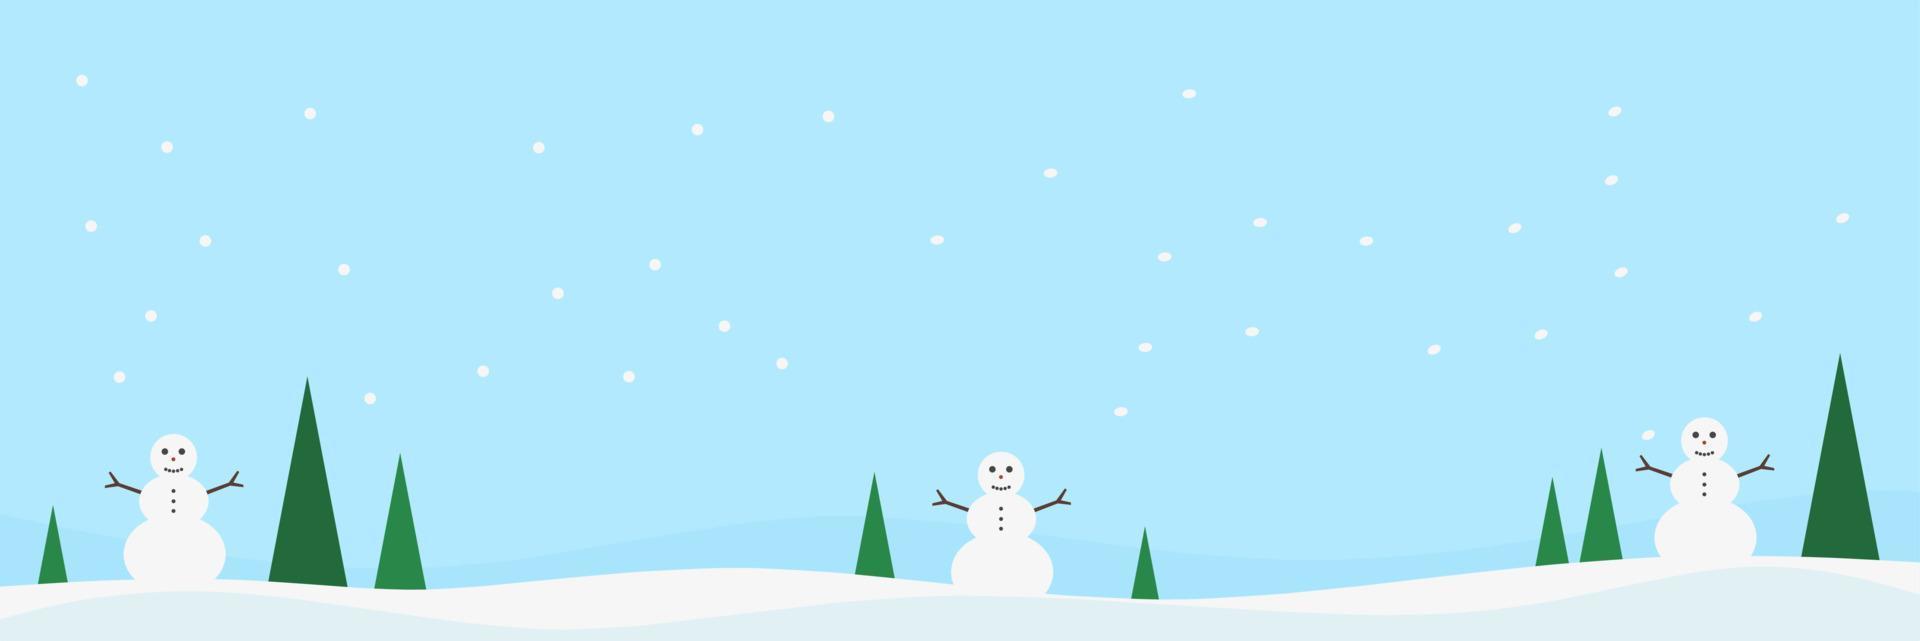 christmas landscape banner with snowman and pine tree for christmas celebration vector